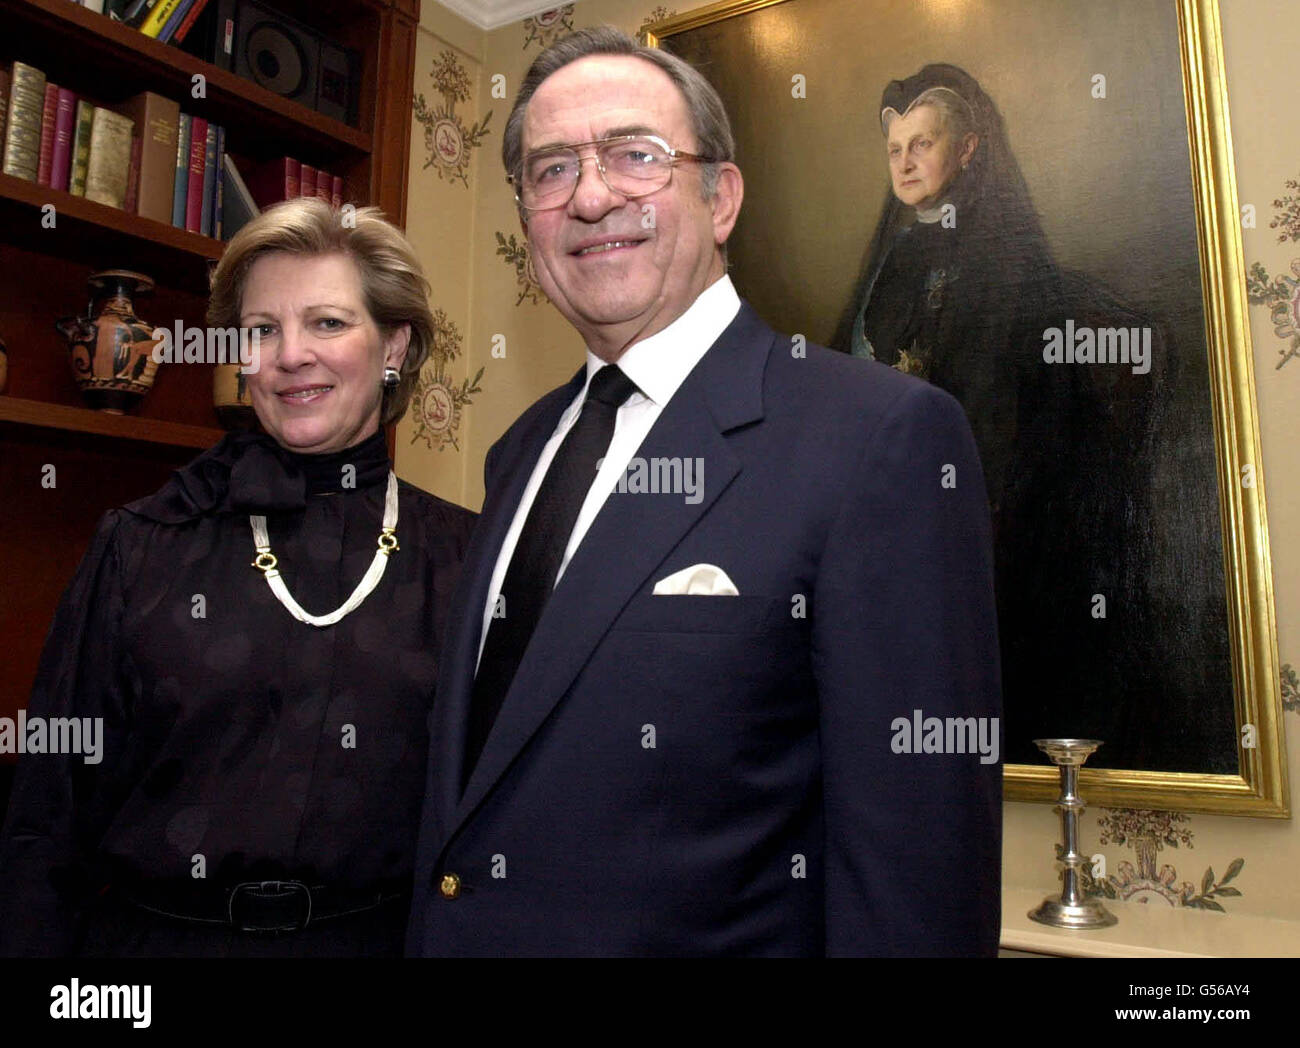 King Constantine of Greece with wife Queen Anne-Marie at their home in north London. The exiled king is 'extremely grateful' after the European Court of Human Rights ruled that Constantine's human rights had been violated when his property was seized in Greece. *... They are in front of a portrait of his Great Grandmother Queen Olga who is also the Grandmother of Britain's Prince Philip. Stock Photo